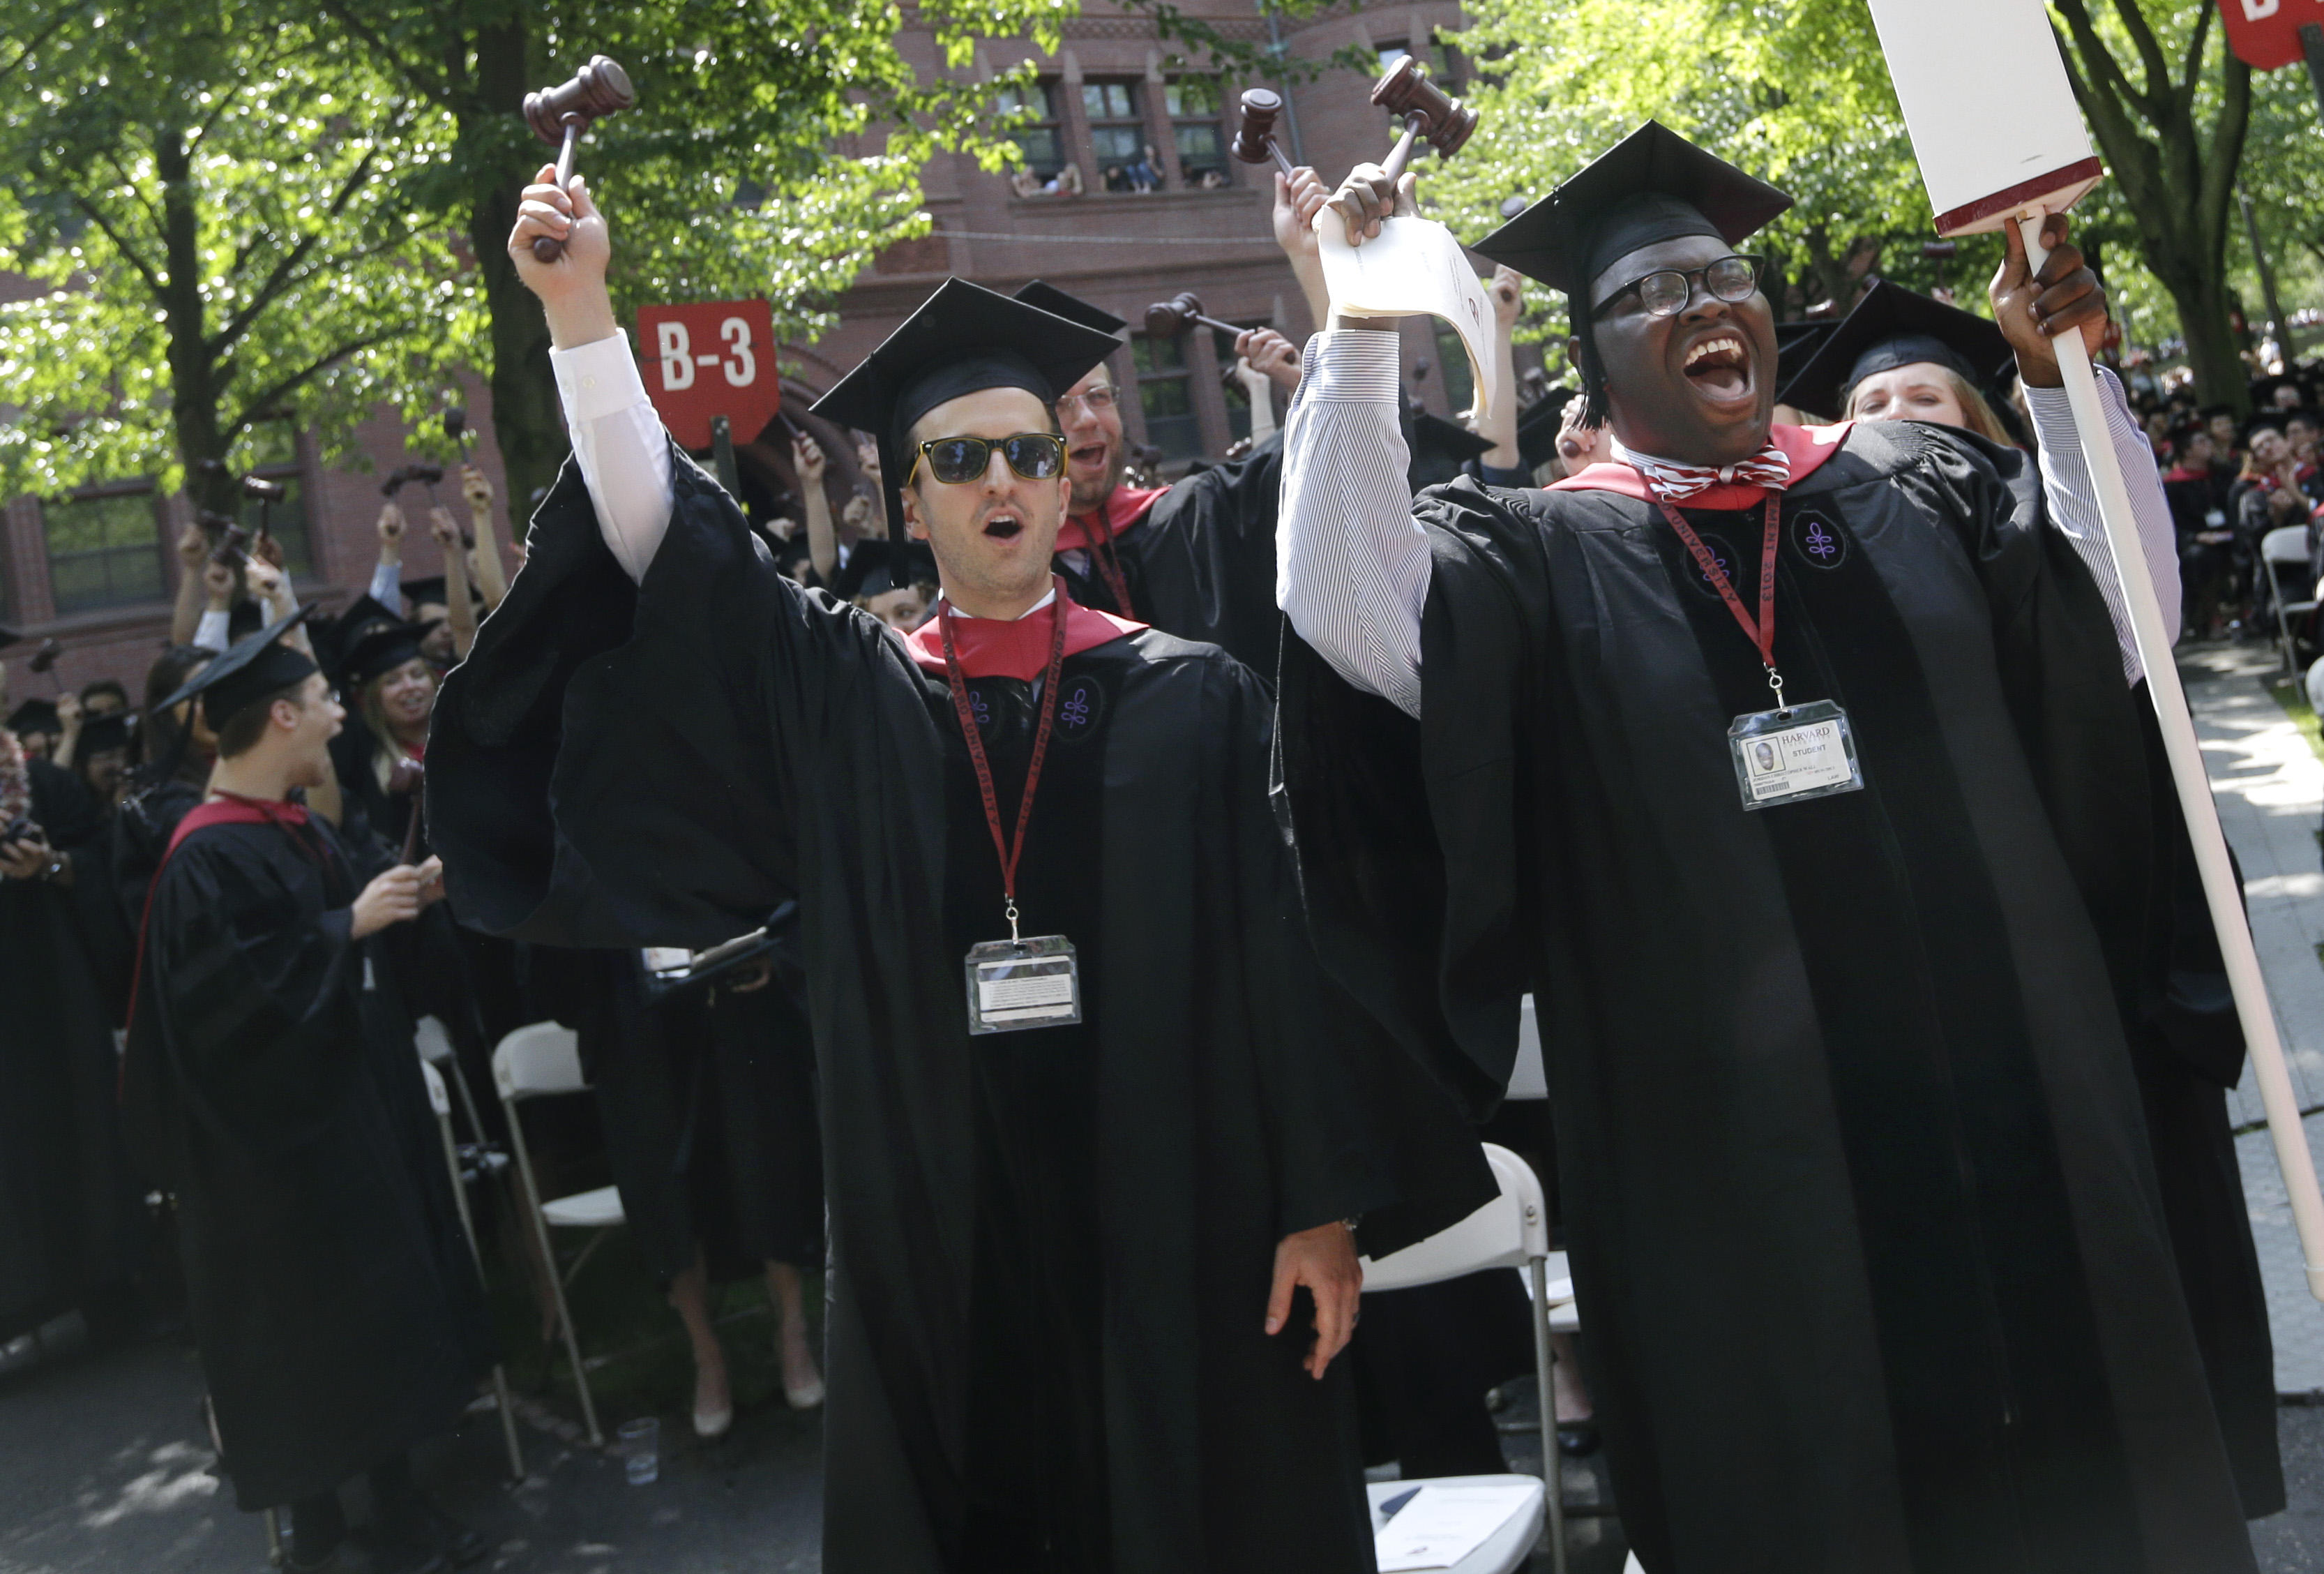 Hundreds of students, guests registered to attend Harvard's first Black